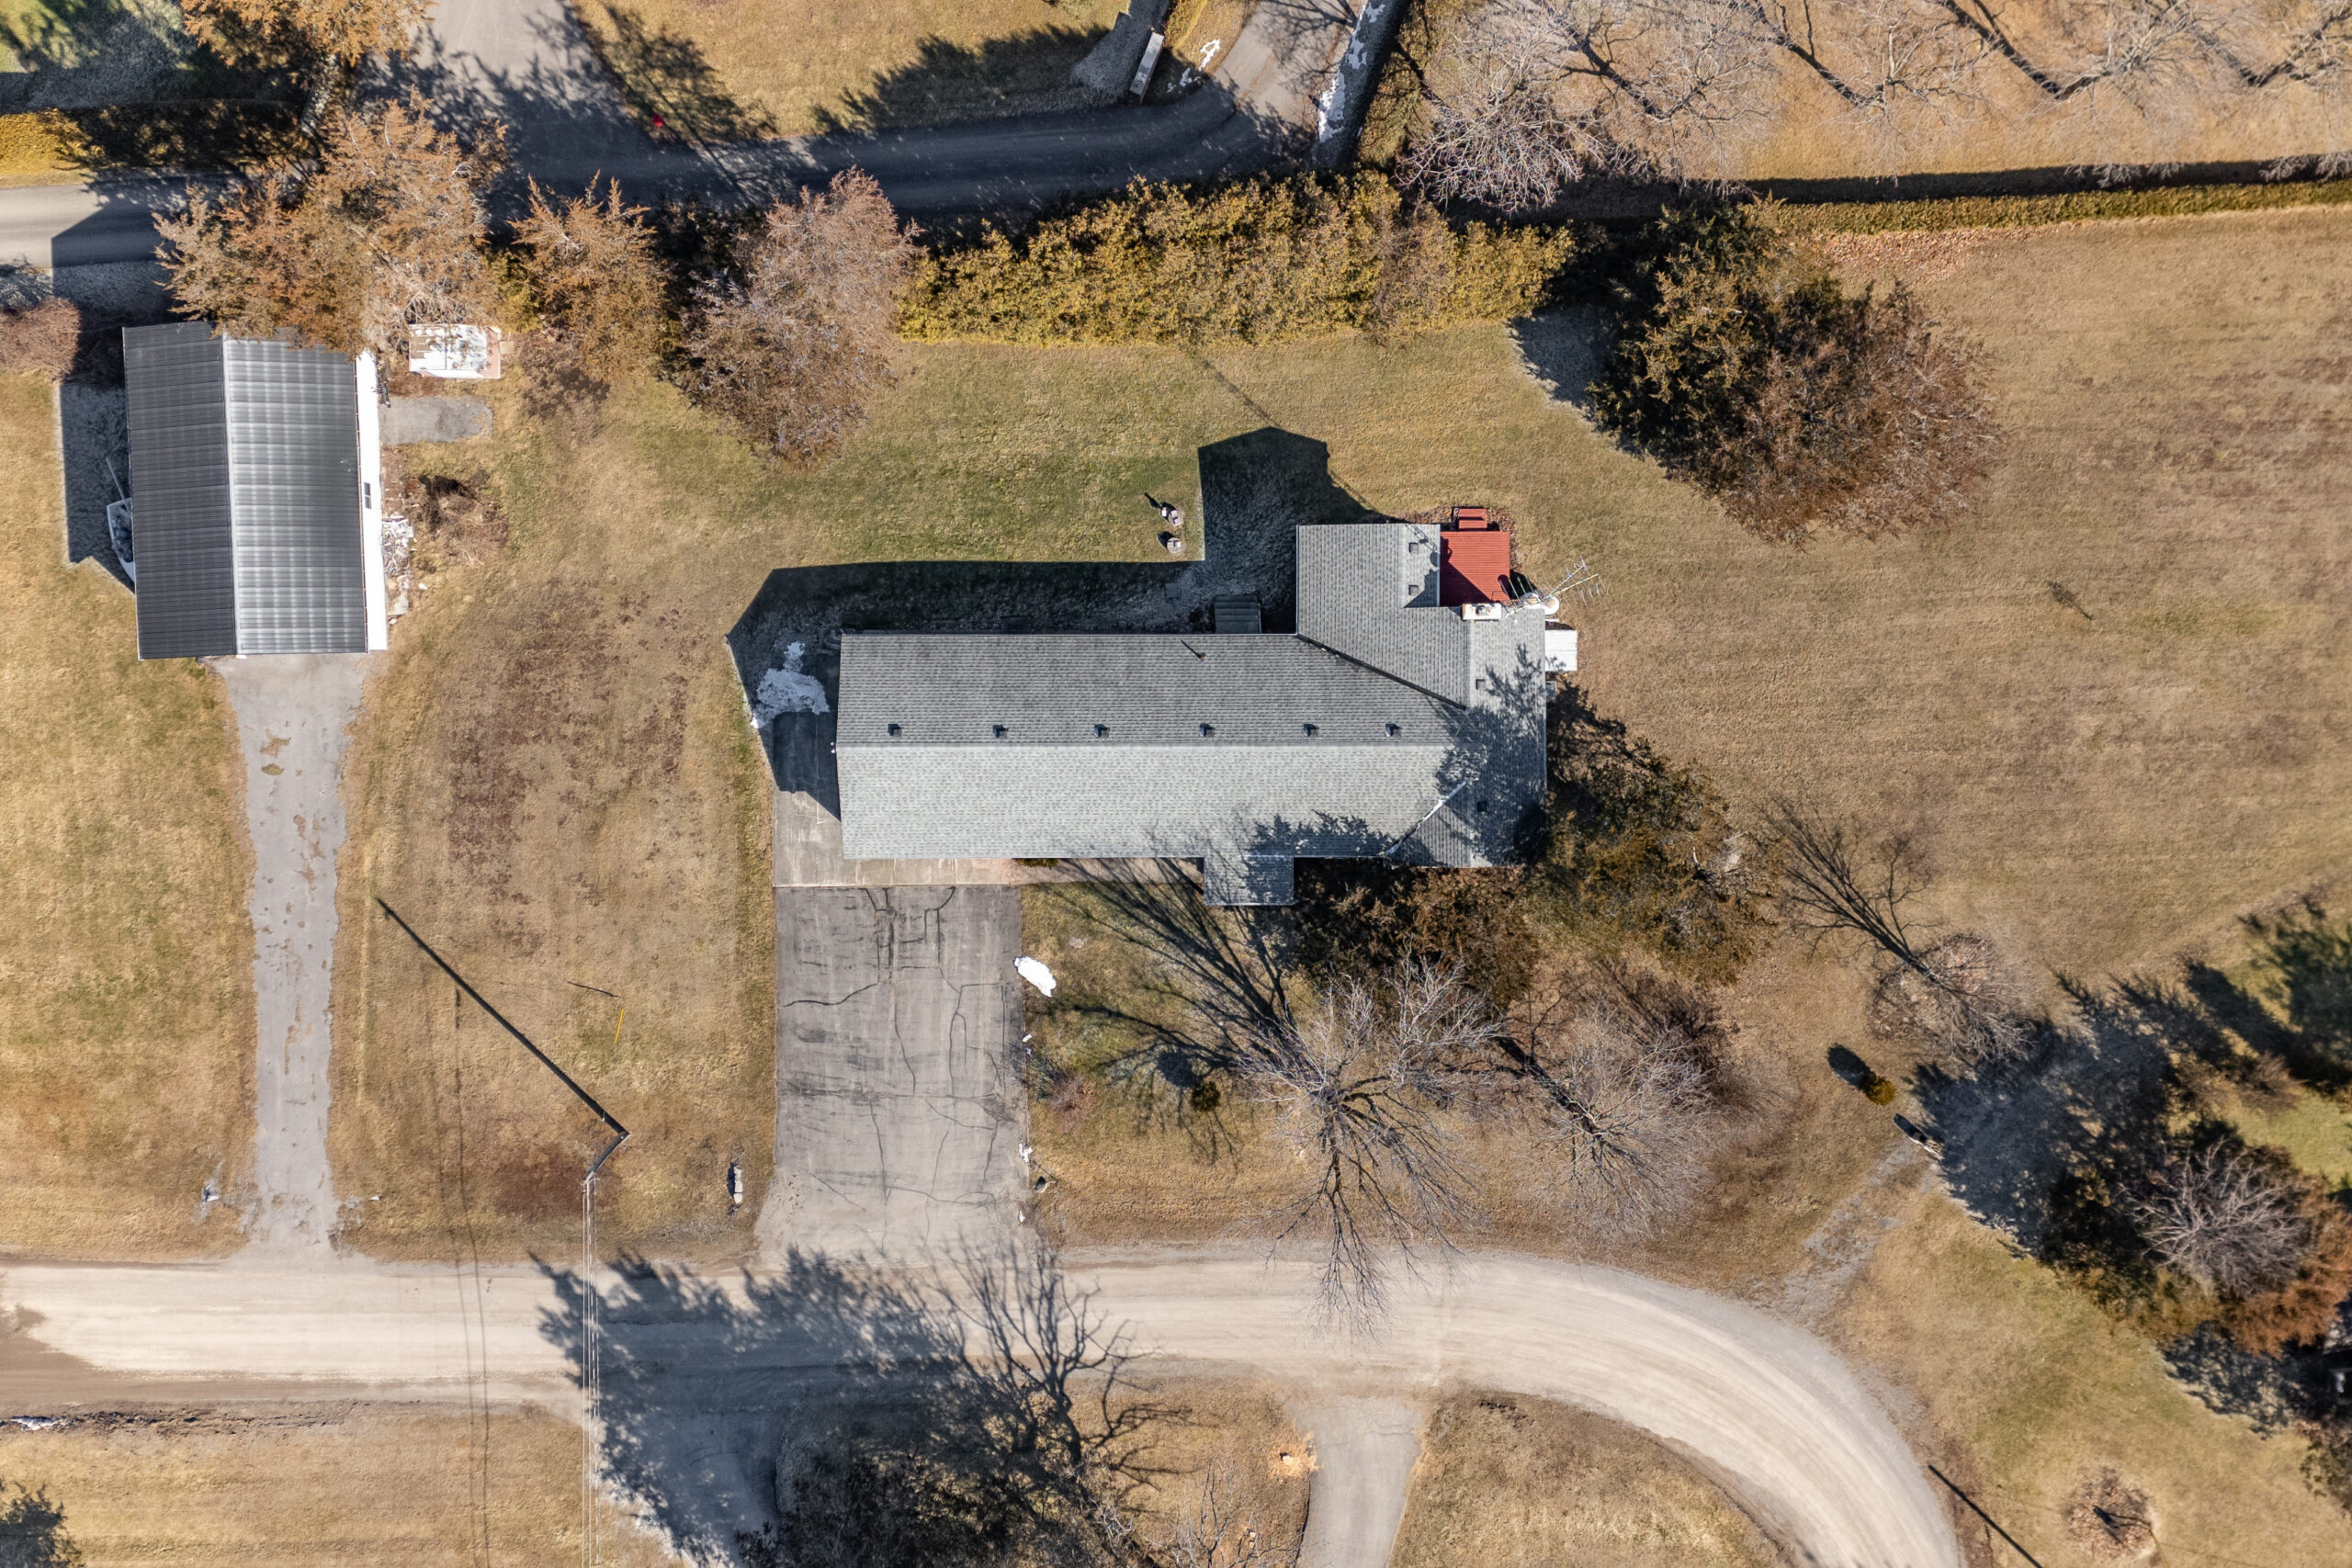 Aerial view of a bungalow with a gray roof, a long driveway, and a detached garage, sitting on a grassy lot.